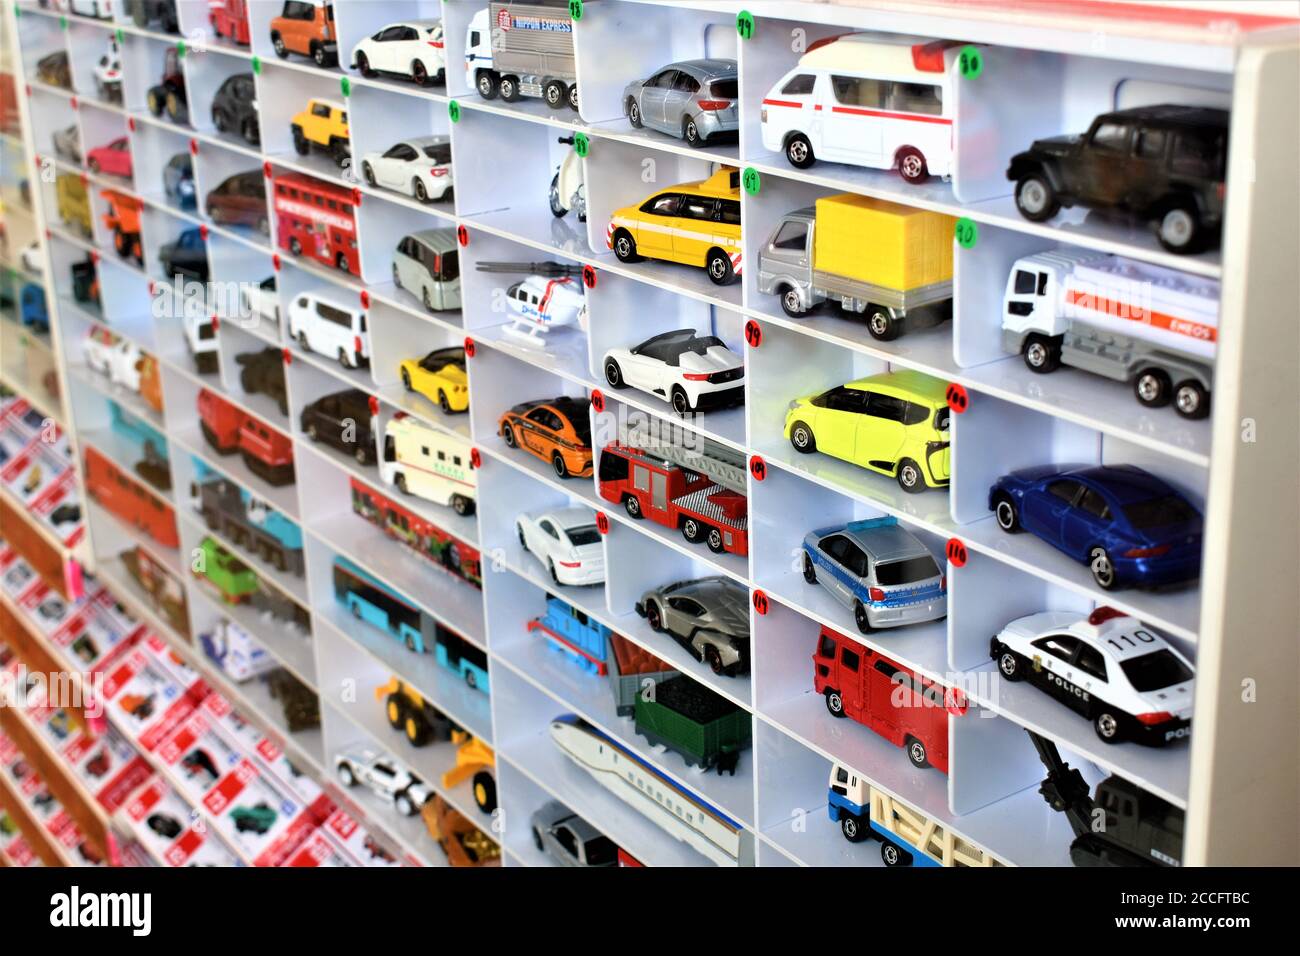 Diecast model cars are displayed for sale on a shelf in a toy store Stock Photo